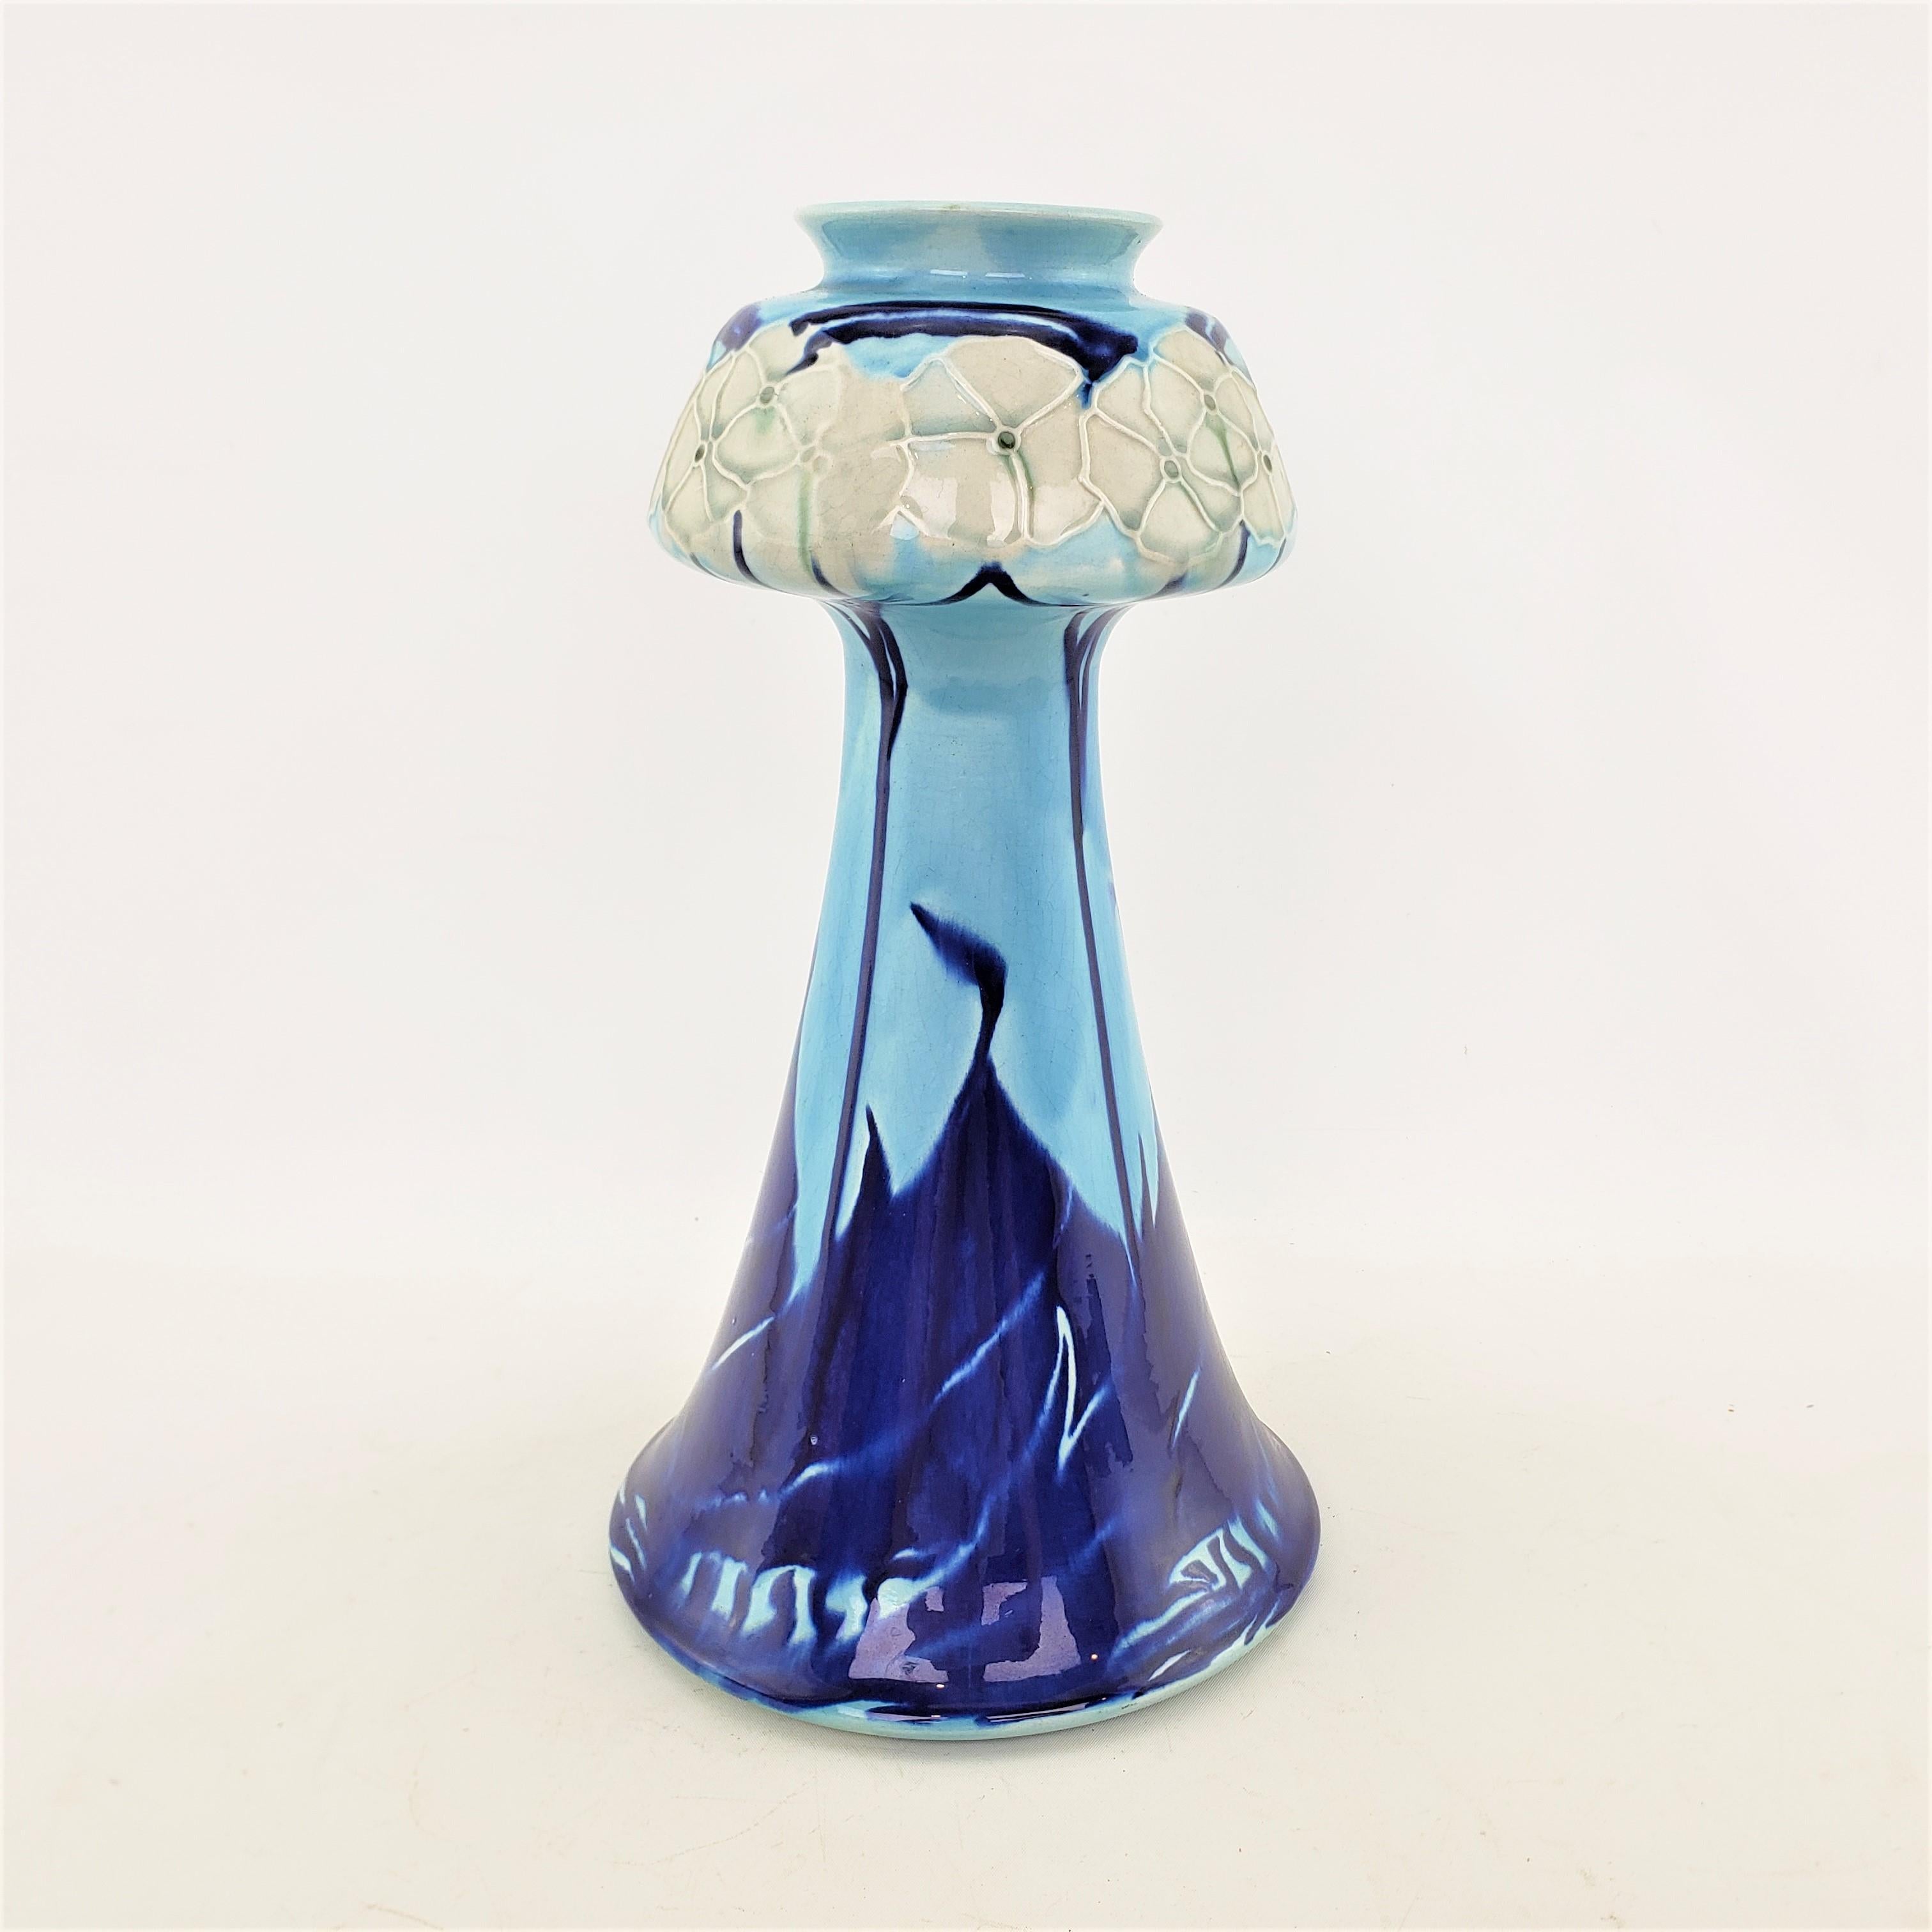 This antique potery vase was made by the renowned Mintons Company of England in approximately 1905 in the period Secessionist style. The vase is done with a Robin egg blue ground with a bulbous top with cream flowers, and a tapered conical shaped